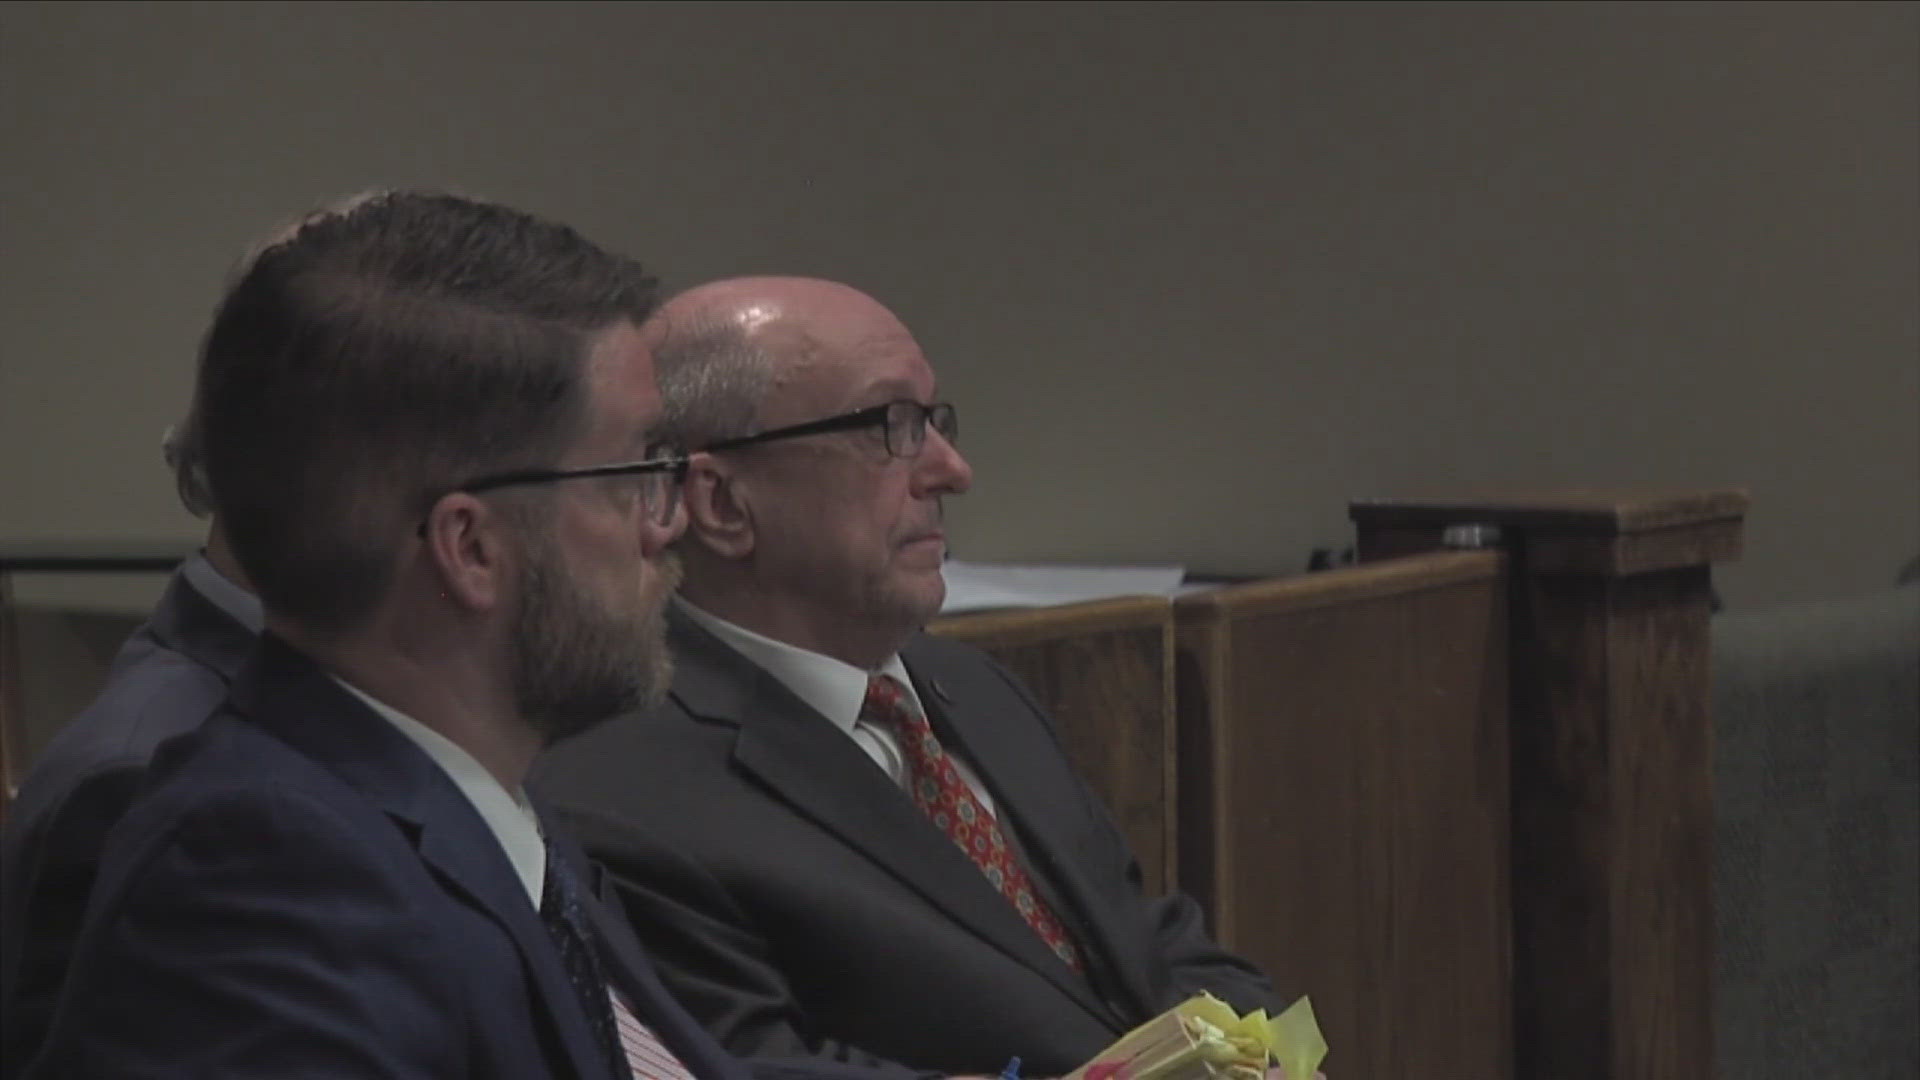 The jury has declared a guilty verdict in the trial of Gregory Livingston, the security guard accused of shooting and killing Alvin Motley Jr. at a gas station.